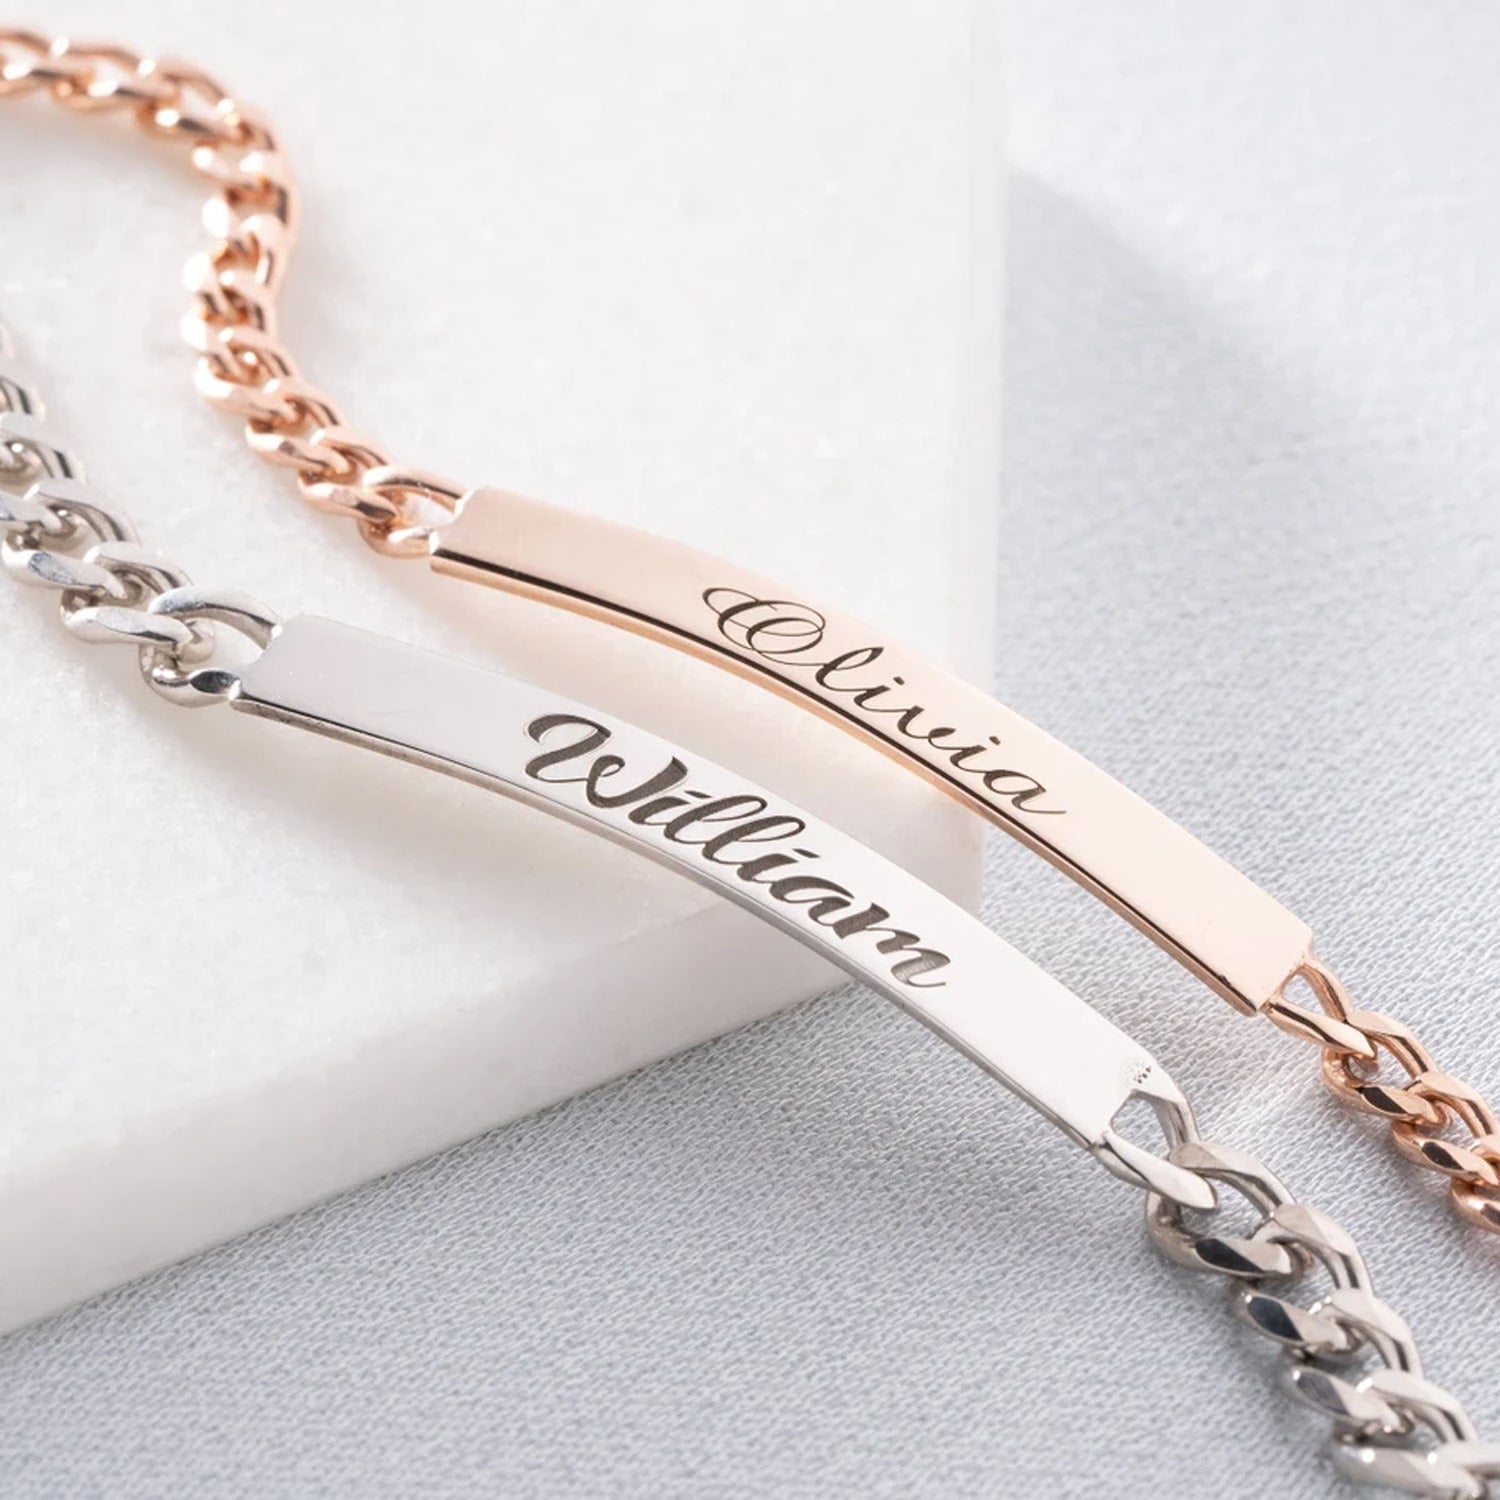 Personalized Bar, Name, Stacking, Coordinates Bracelet Bridesmaid Gift For  Her | eBay